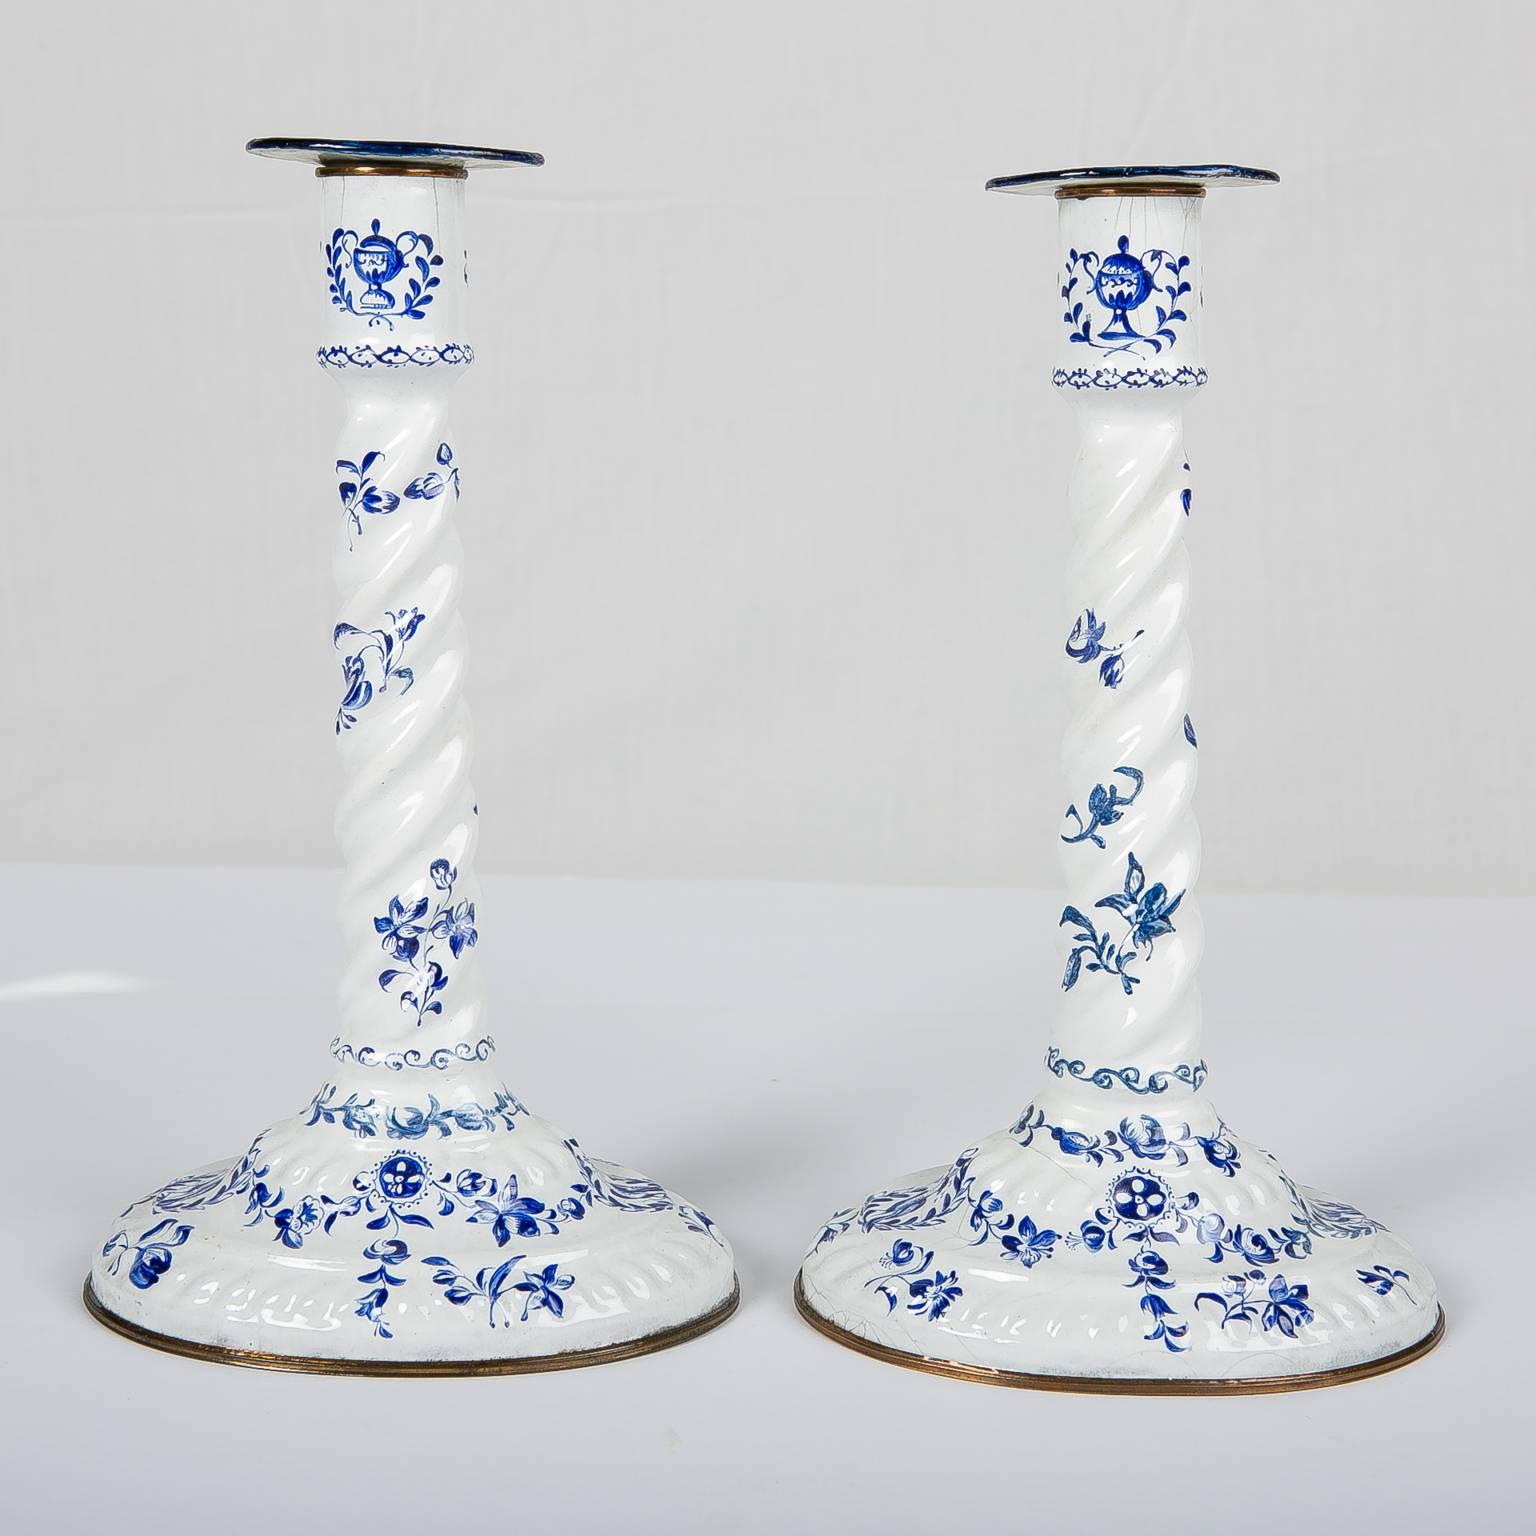 We are pleased to offer this pair of mid-18th century blue and white candlesticks painted with flowers and songbirds. Made by Battersea these enamel candlesticks have typical Battersea rope-twist shafts rising from an oval base and separate small